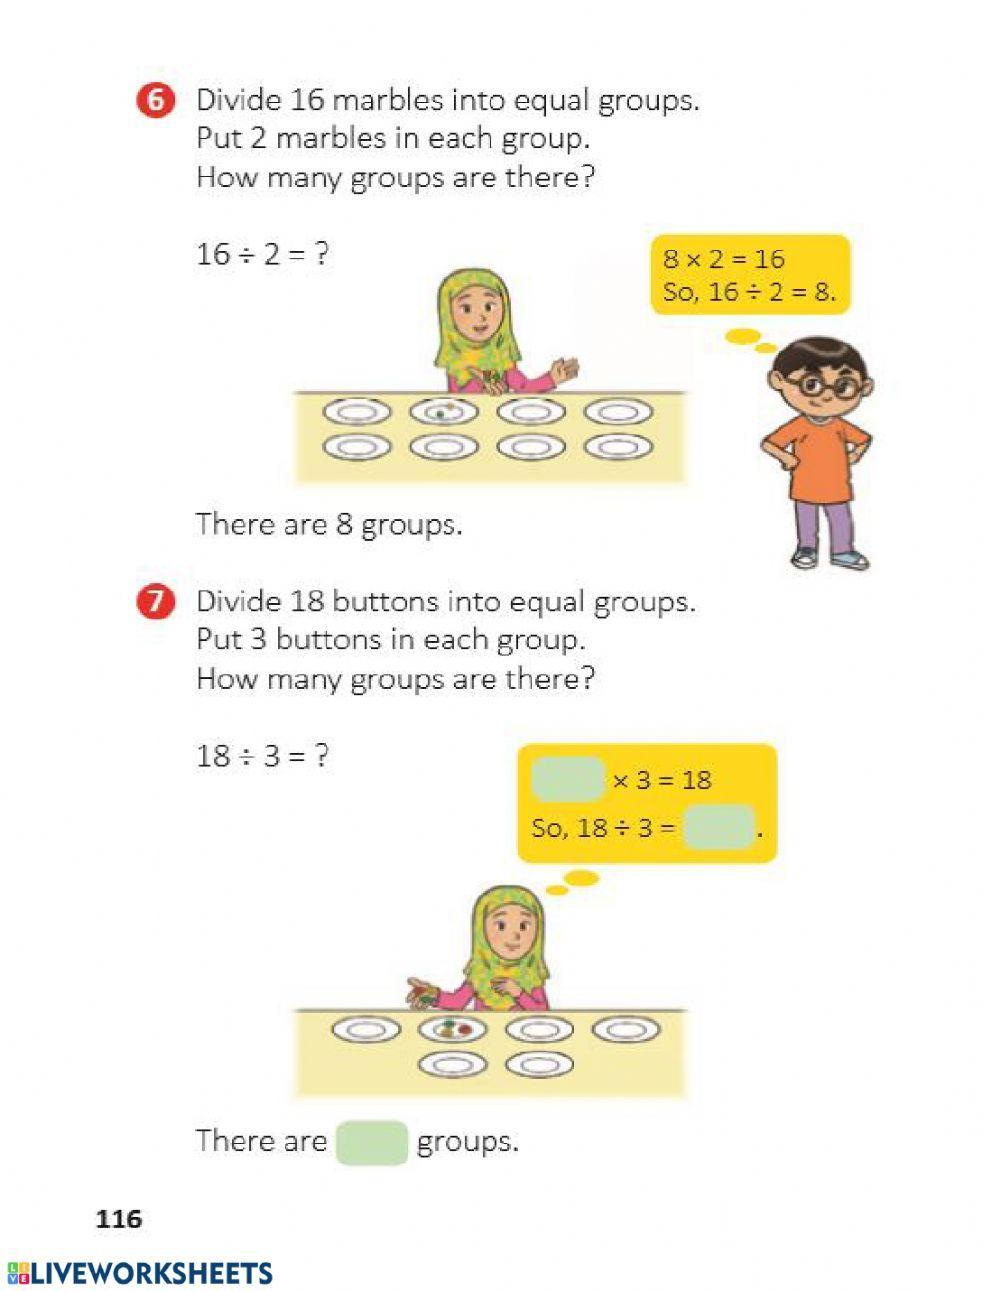 Chapter 5 - Multiplication Tables of 1, 2 and 3